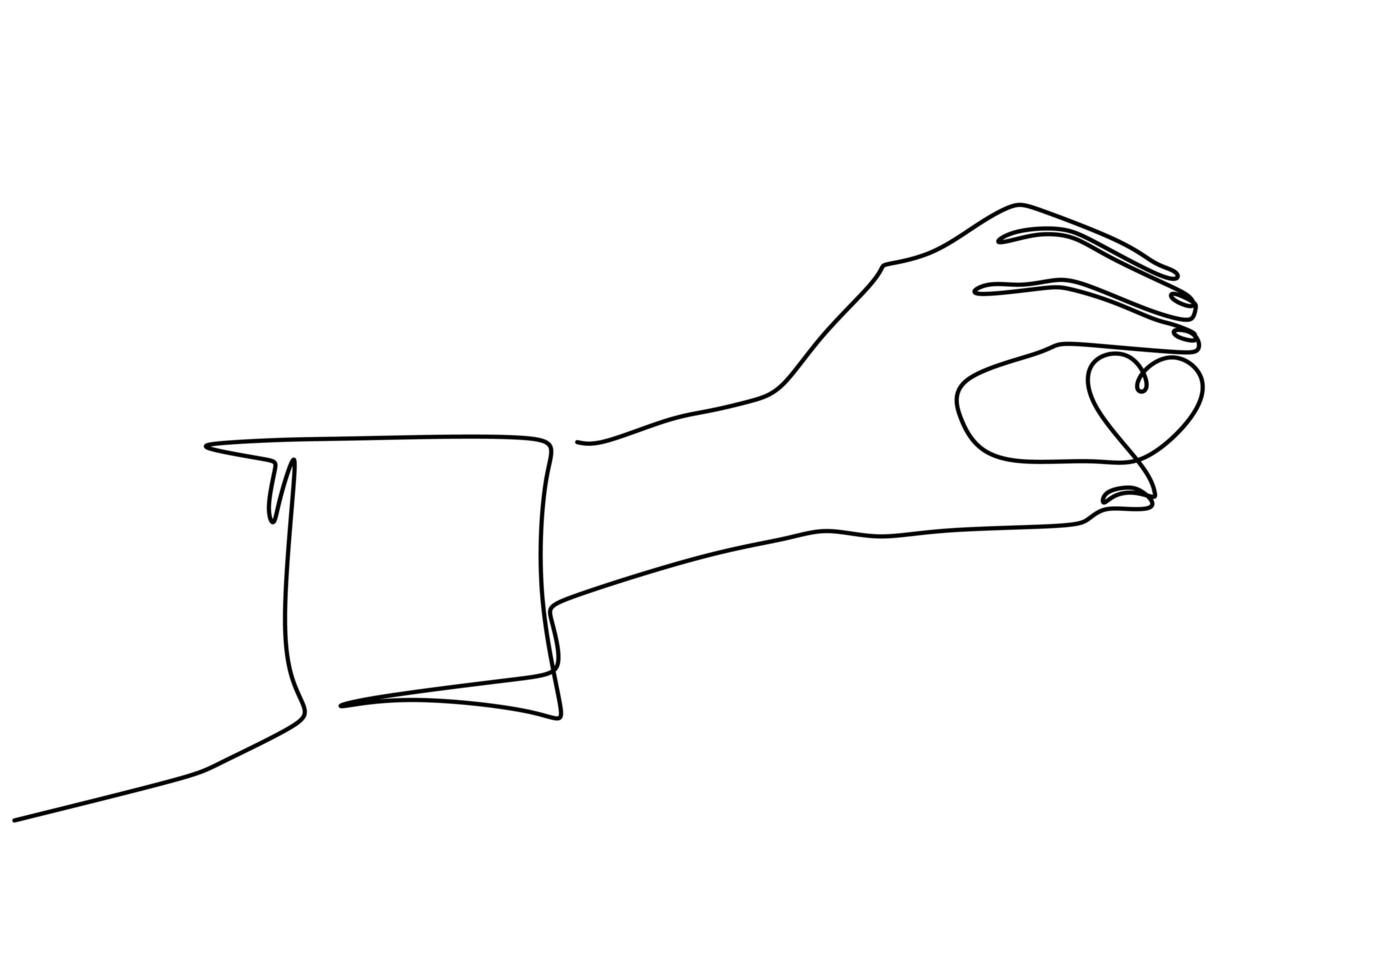 Continuous line drawing hand holding a piece of heart, one hand drawn sketch vector illustration.